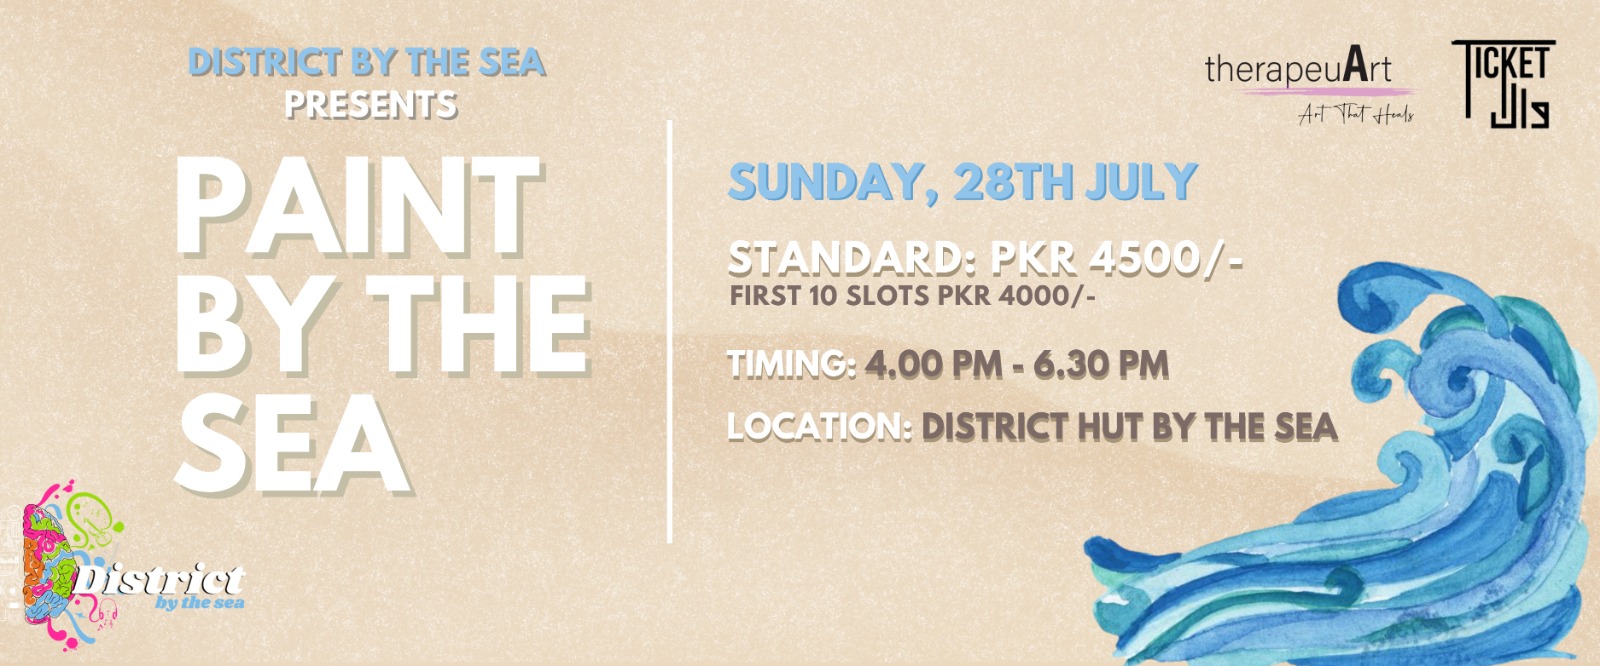 District 19 Presents Paint by the sea 